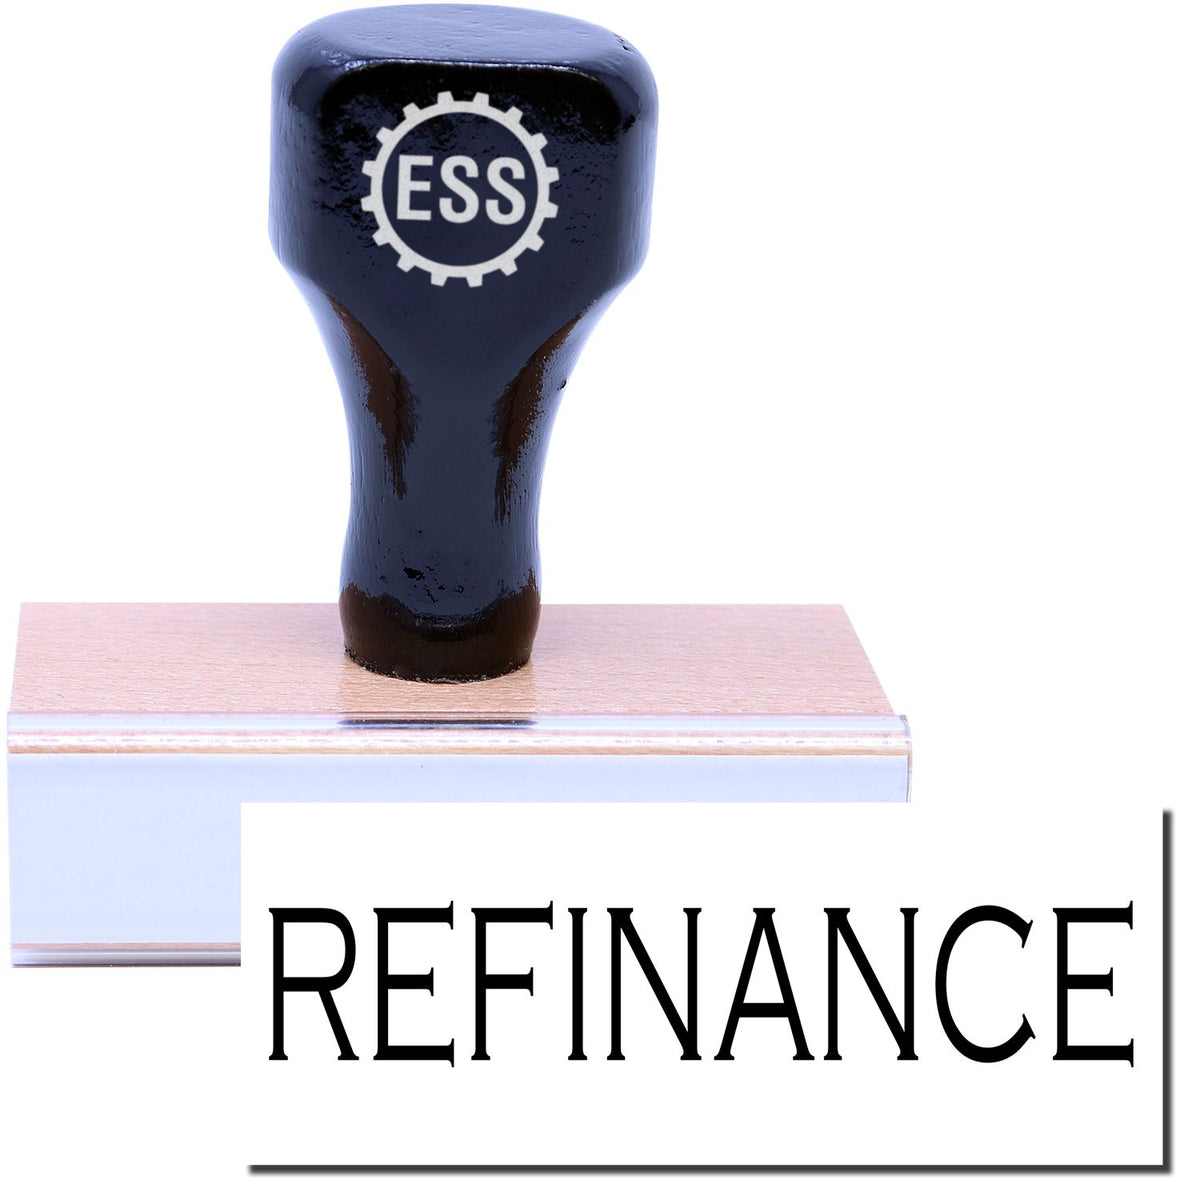 A stock office rubber stamp with a stamped image showing how the text &quot;REFINANCE&quot; in a large font is displayed after stamping.